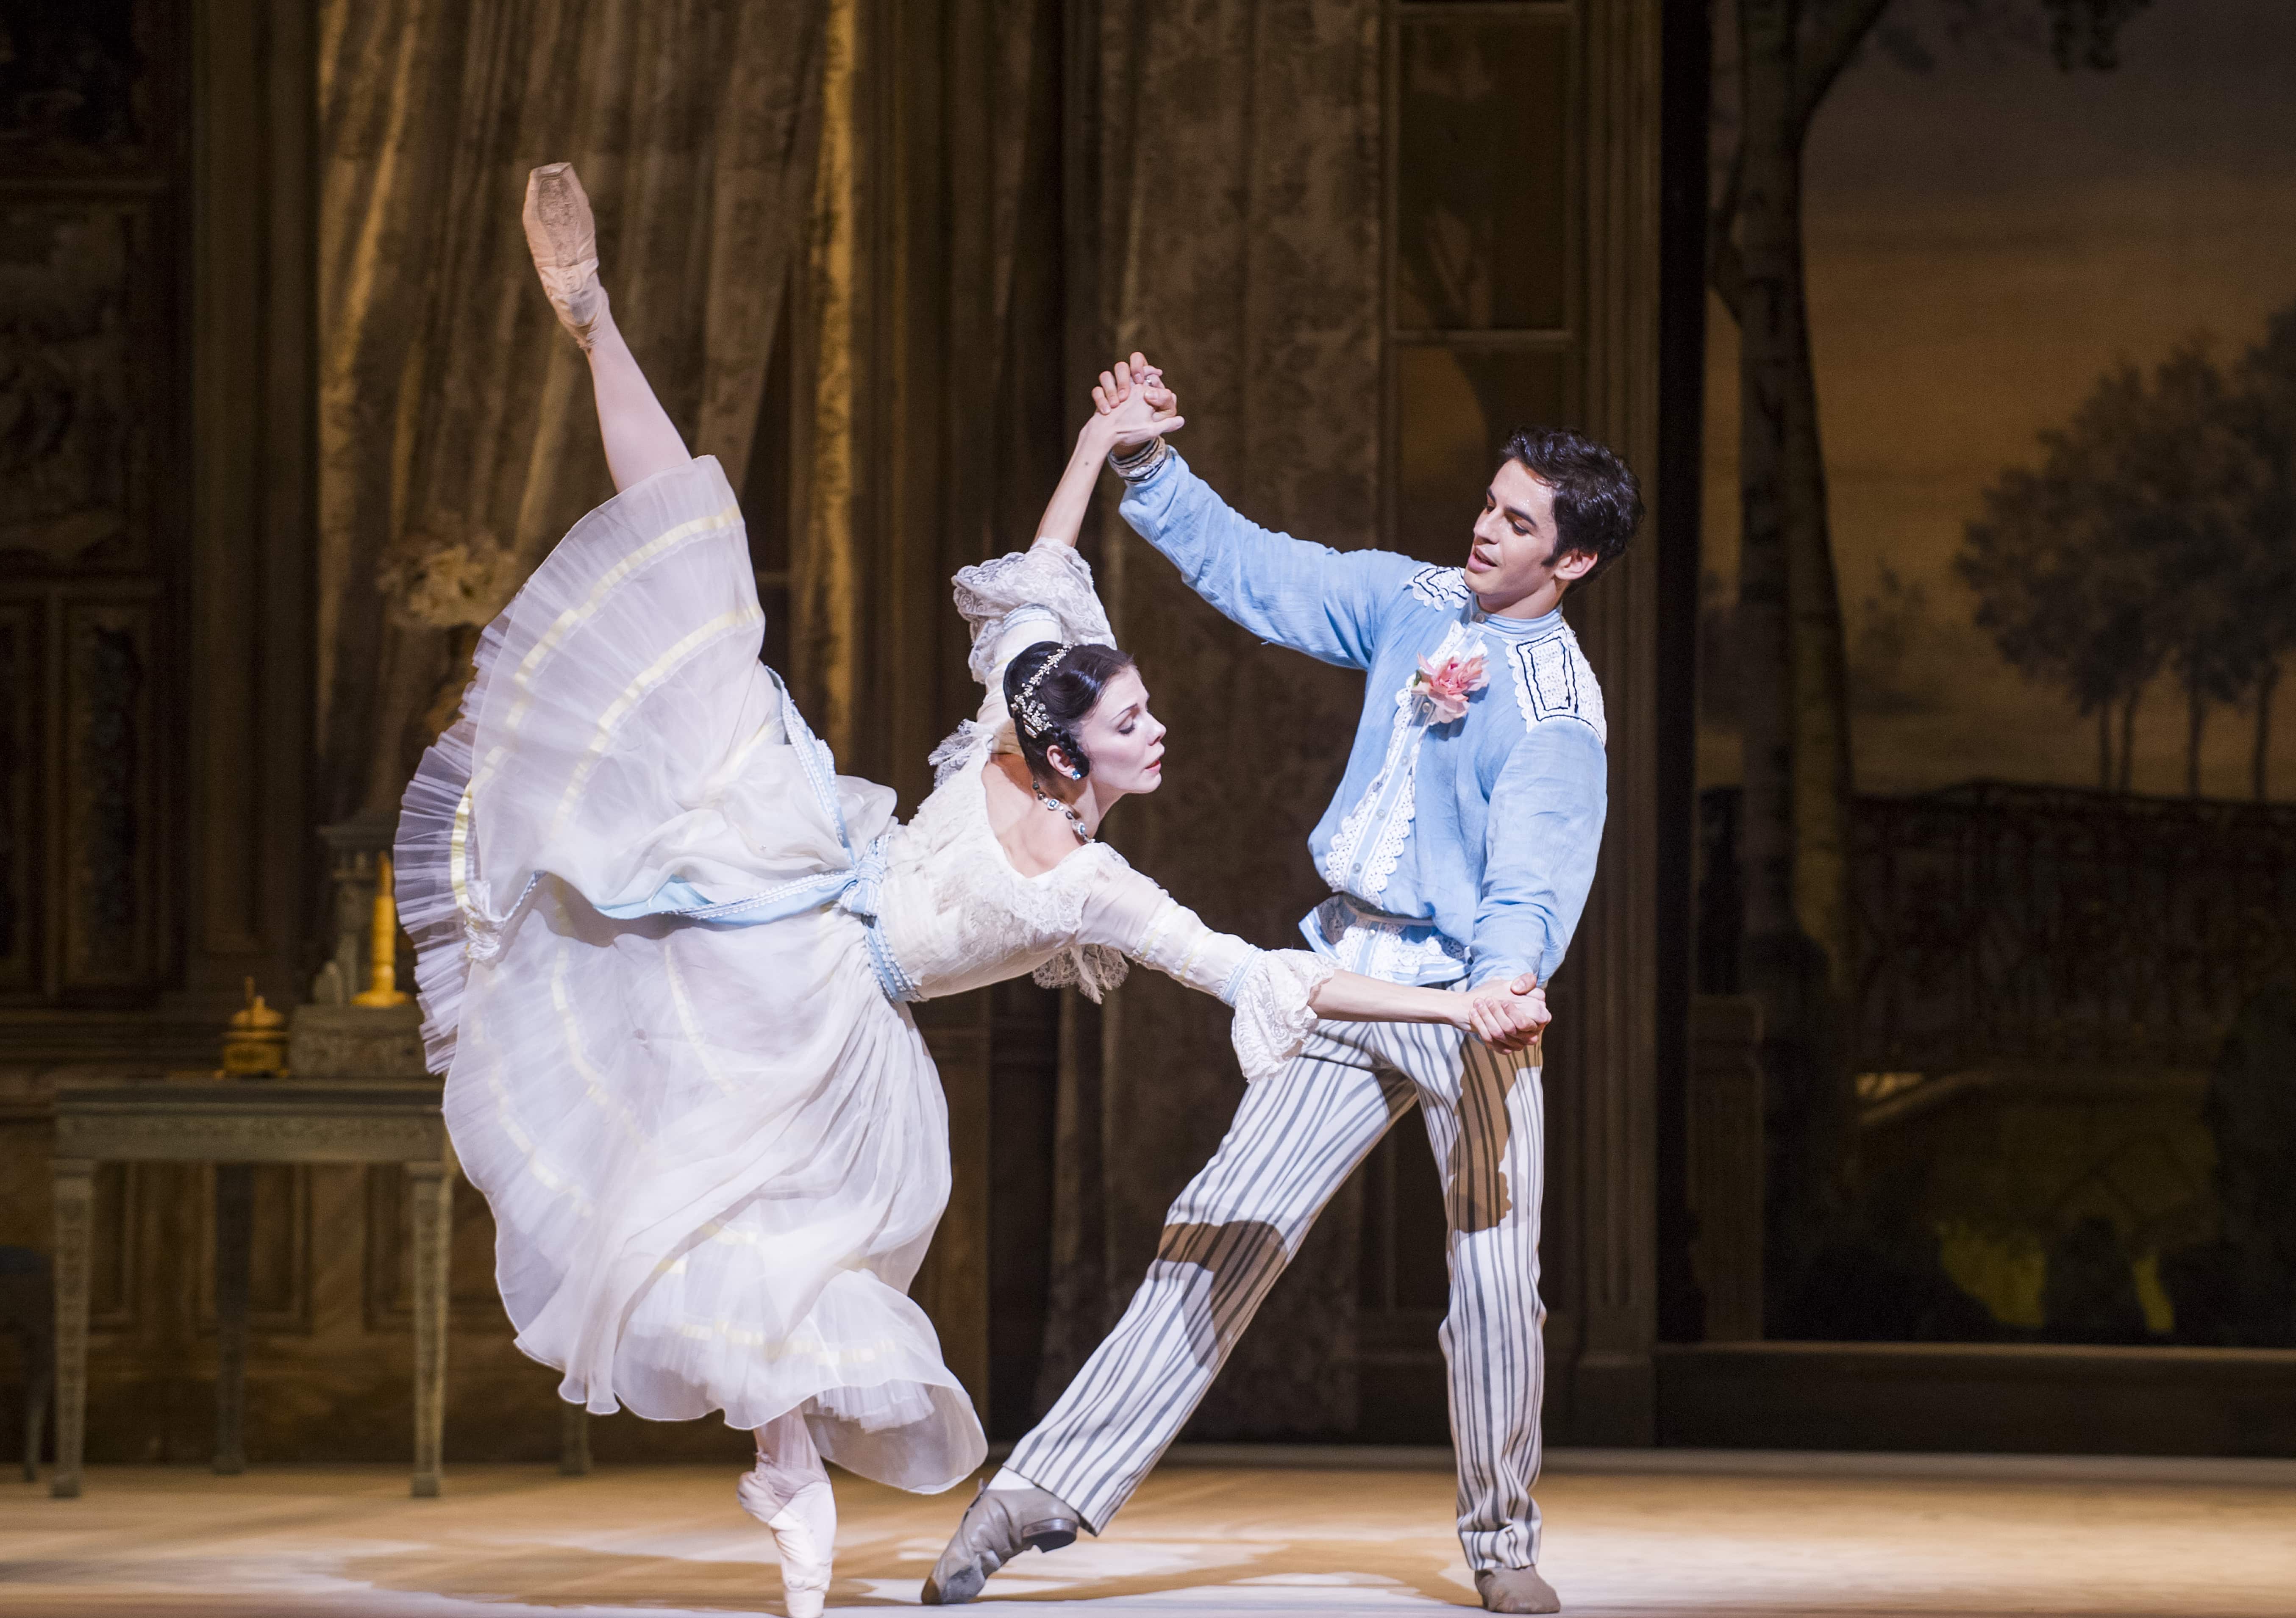 A Month in the Country. Natalia Osipova and Federico Bonelli. ©ROH, 2014. Photographed by Tristram Kenton